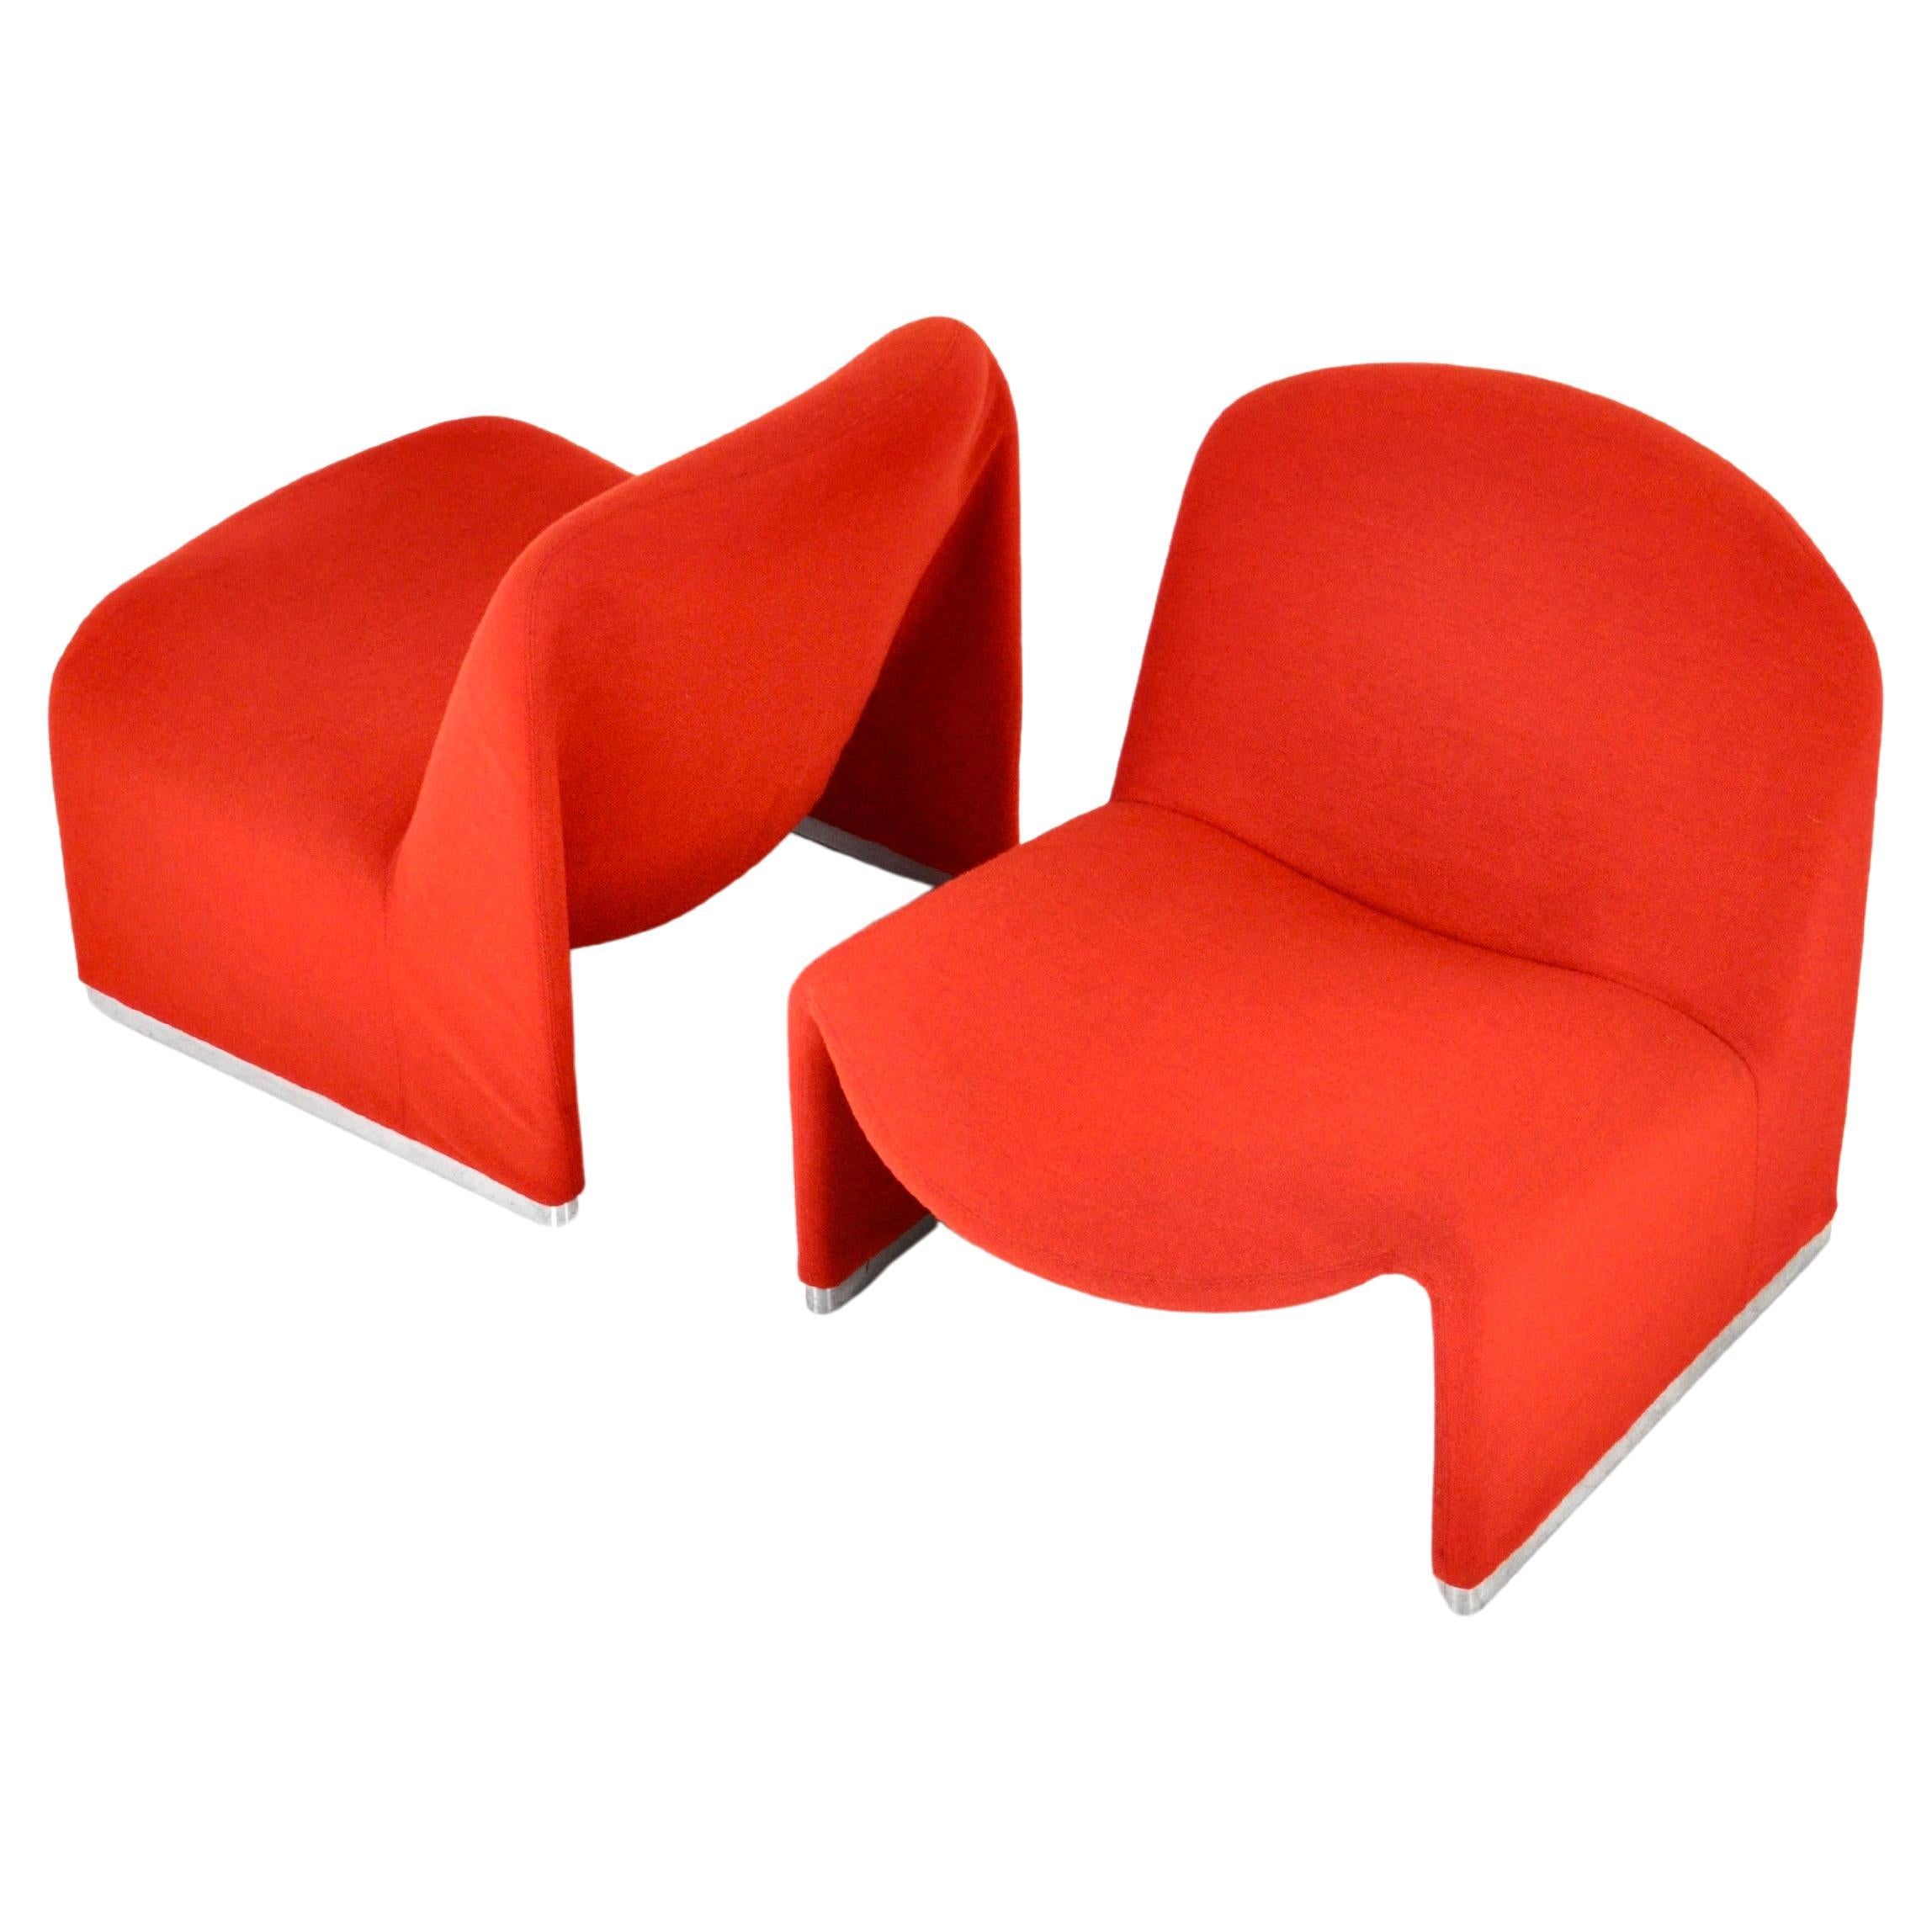 Alky Chairs by Giancarlo Piretti for Anonima Castelli, 1970s, Set of 2